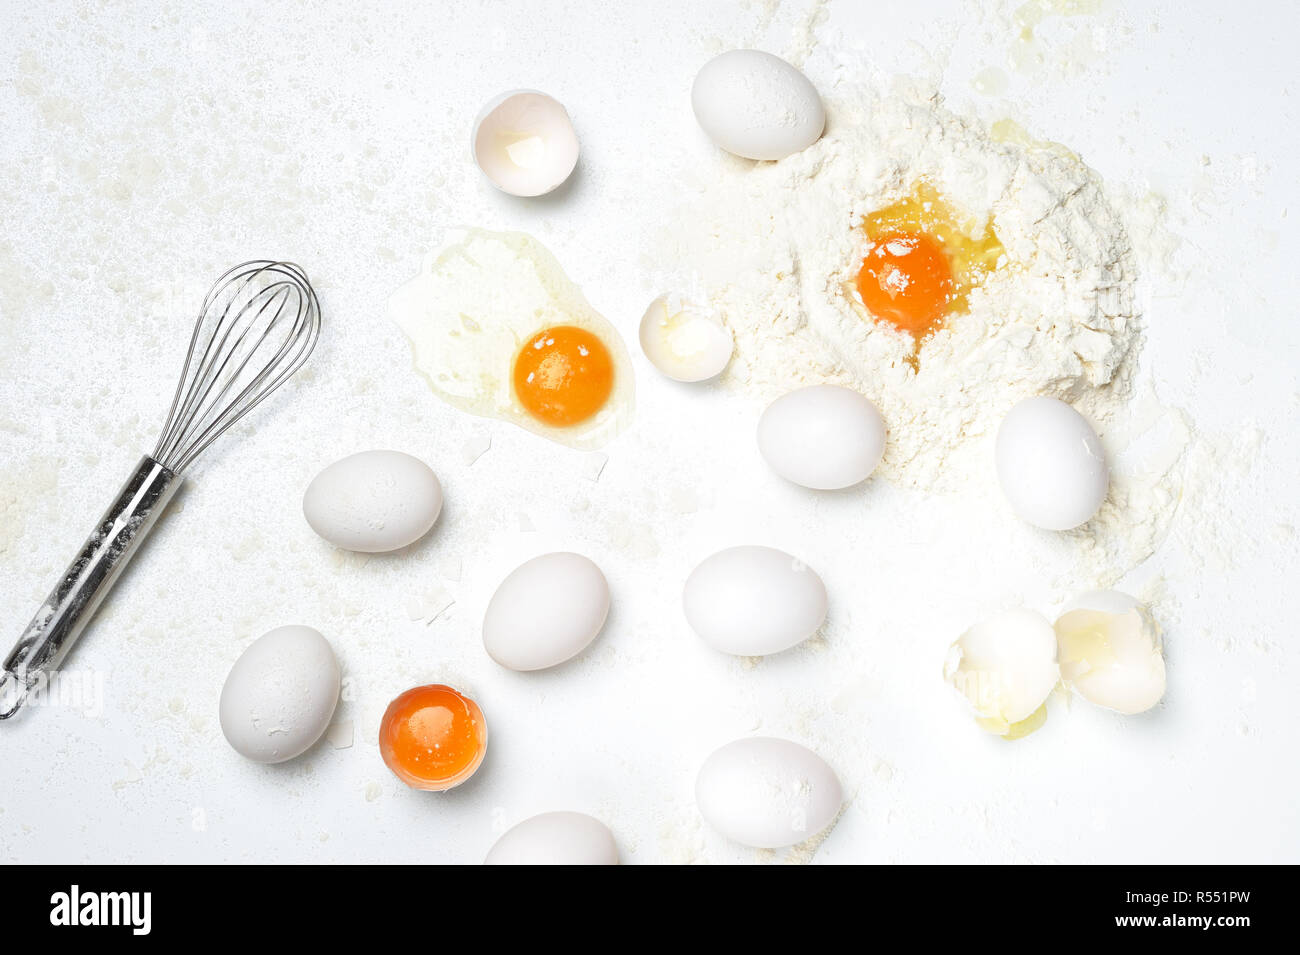 Basic ingredients into fresh pasta or dough with only  eggs, flour,whisker on the white background. Flour on the work surface. Stock Photo